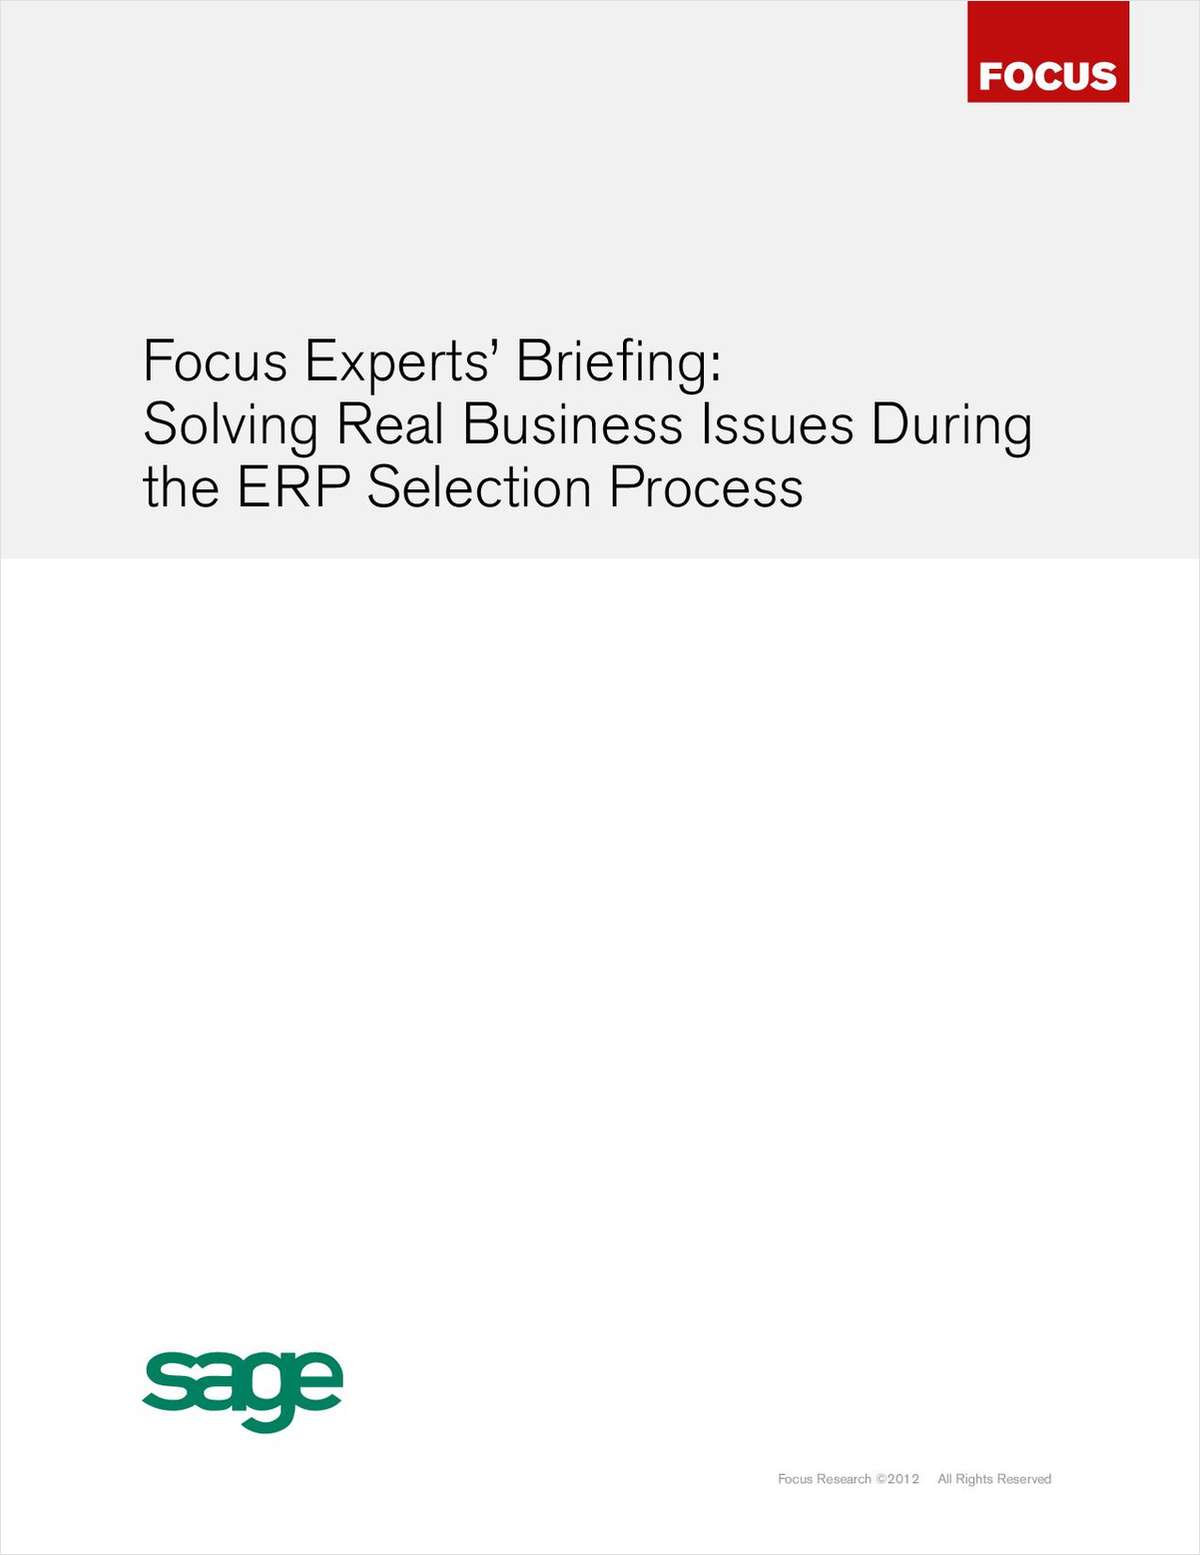 Solving Real Business Issues During the ERP Selection Process